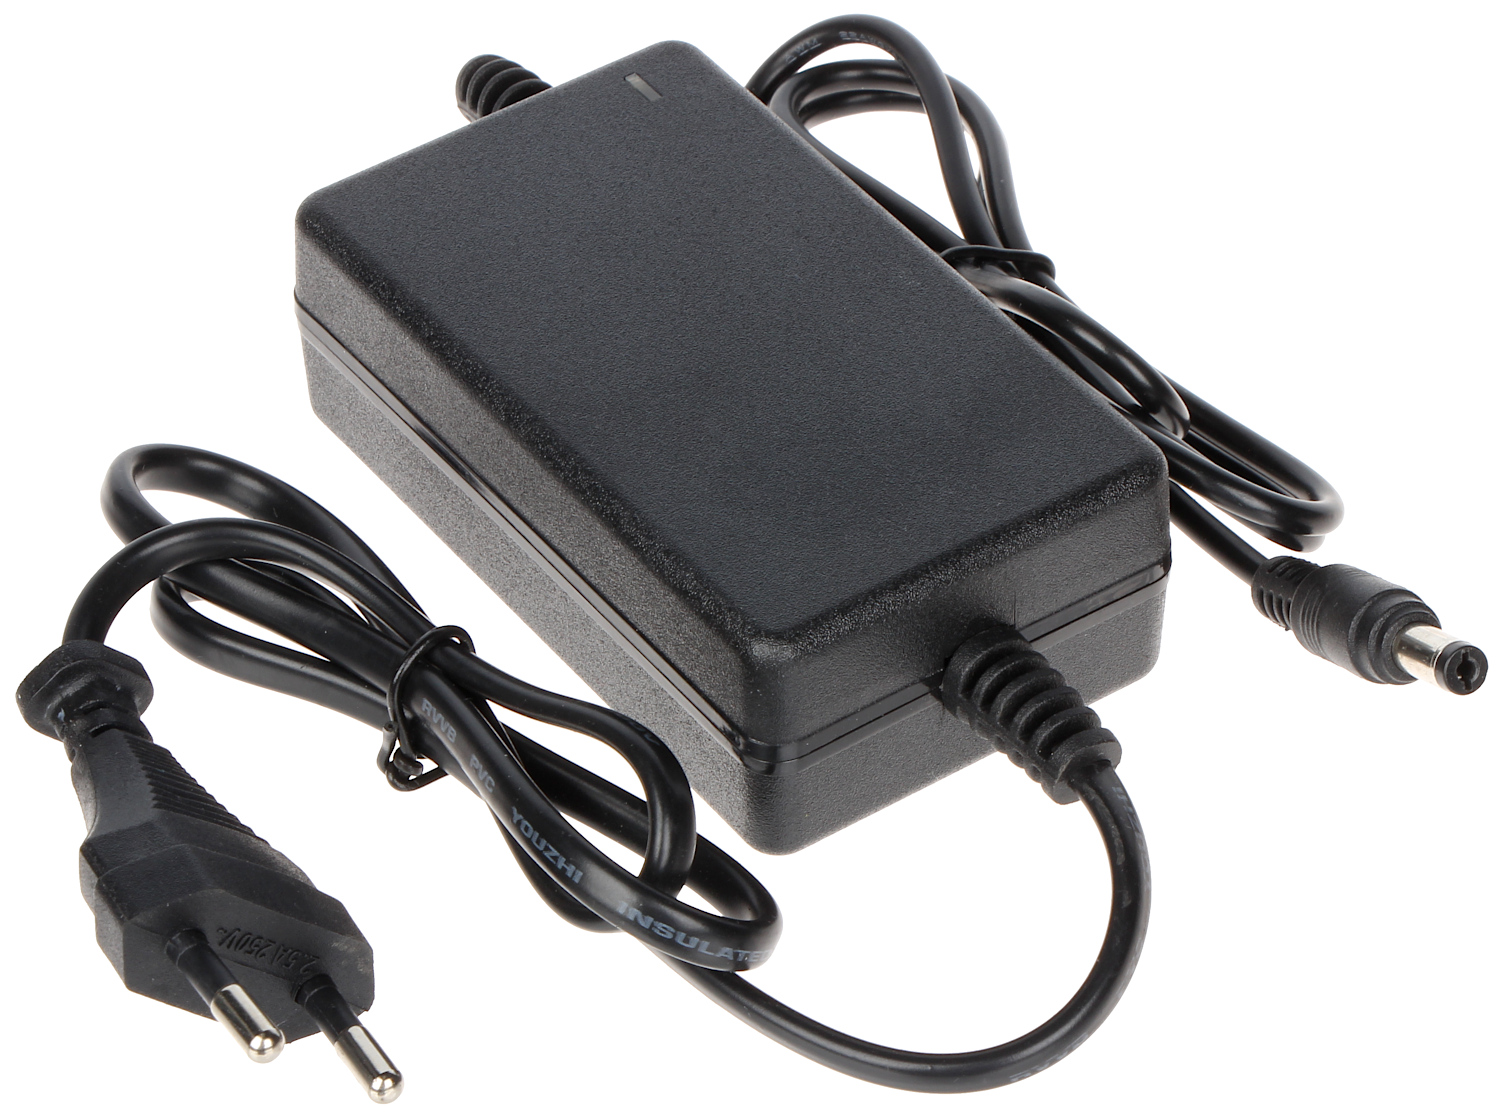 POWER SUPPLY ADAPTER 12V/2A/5.5 - With plug, indoor - Delta